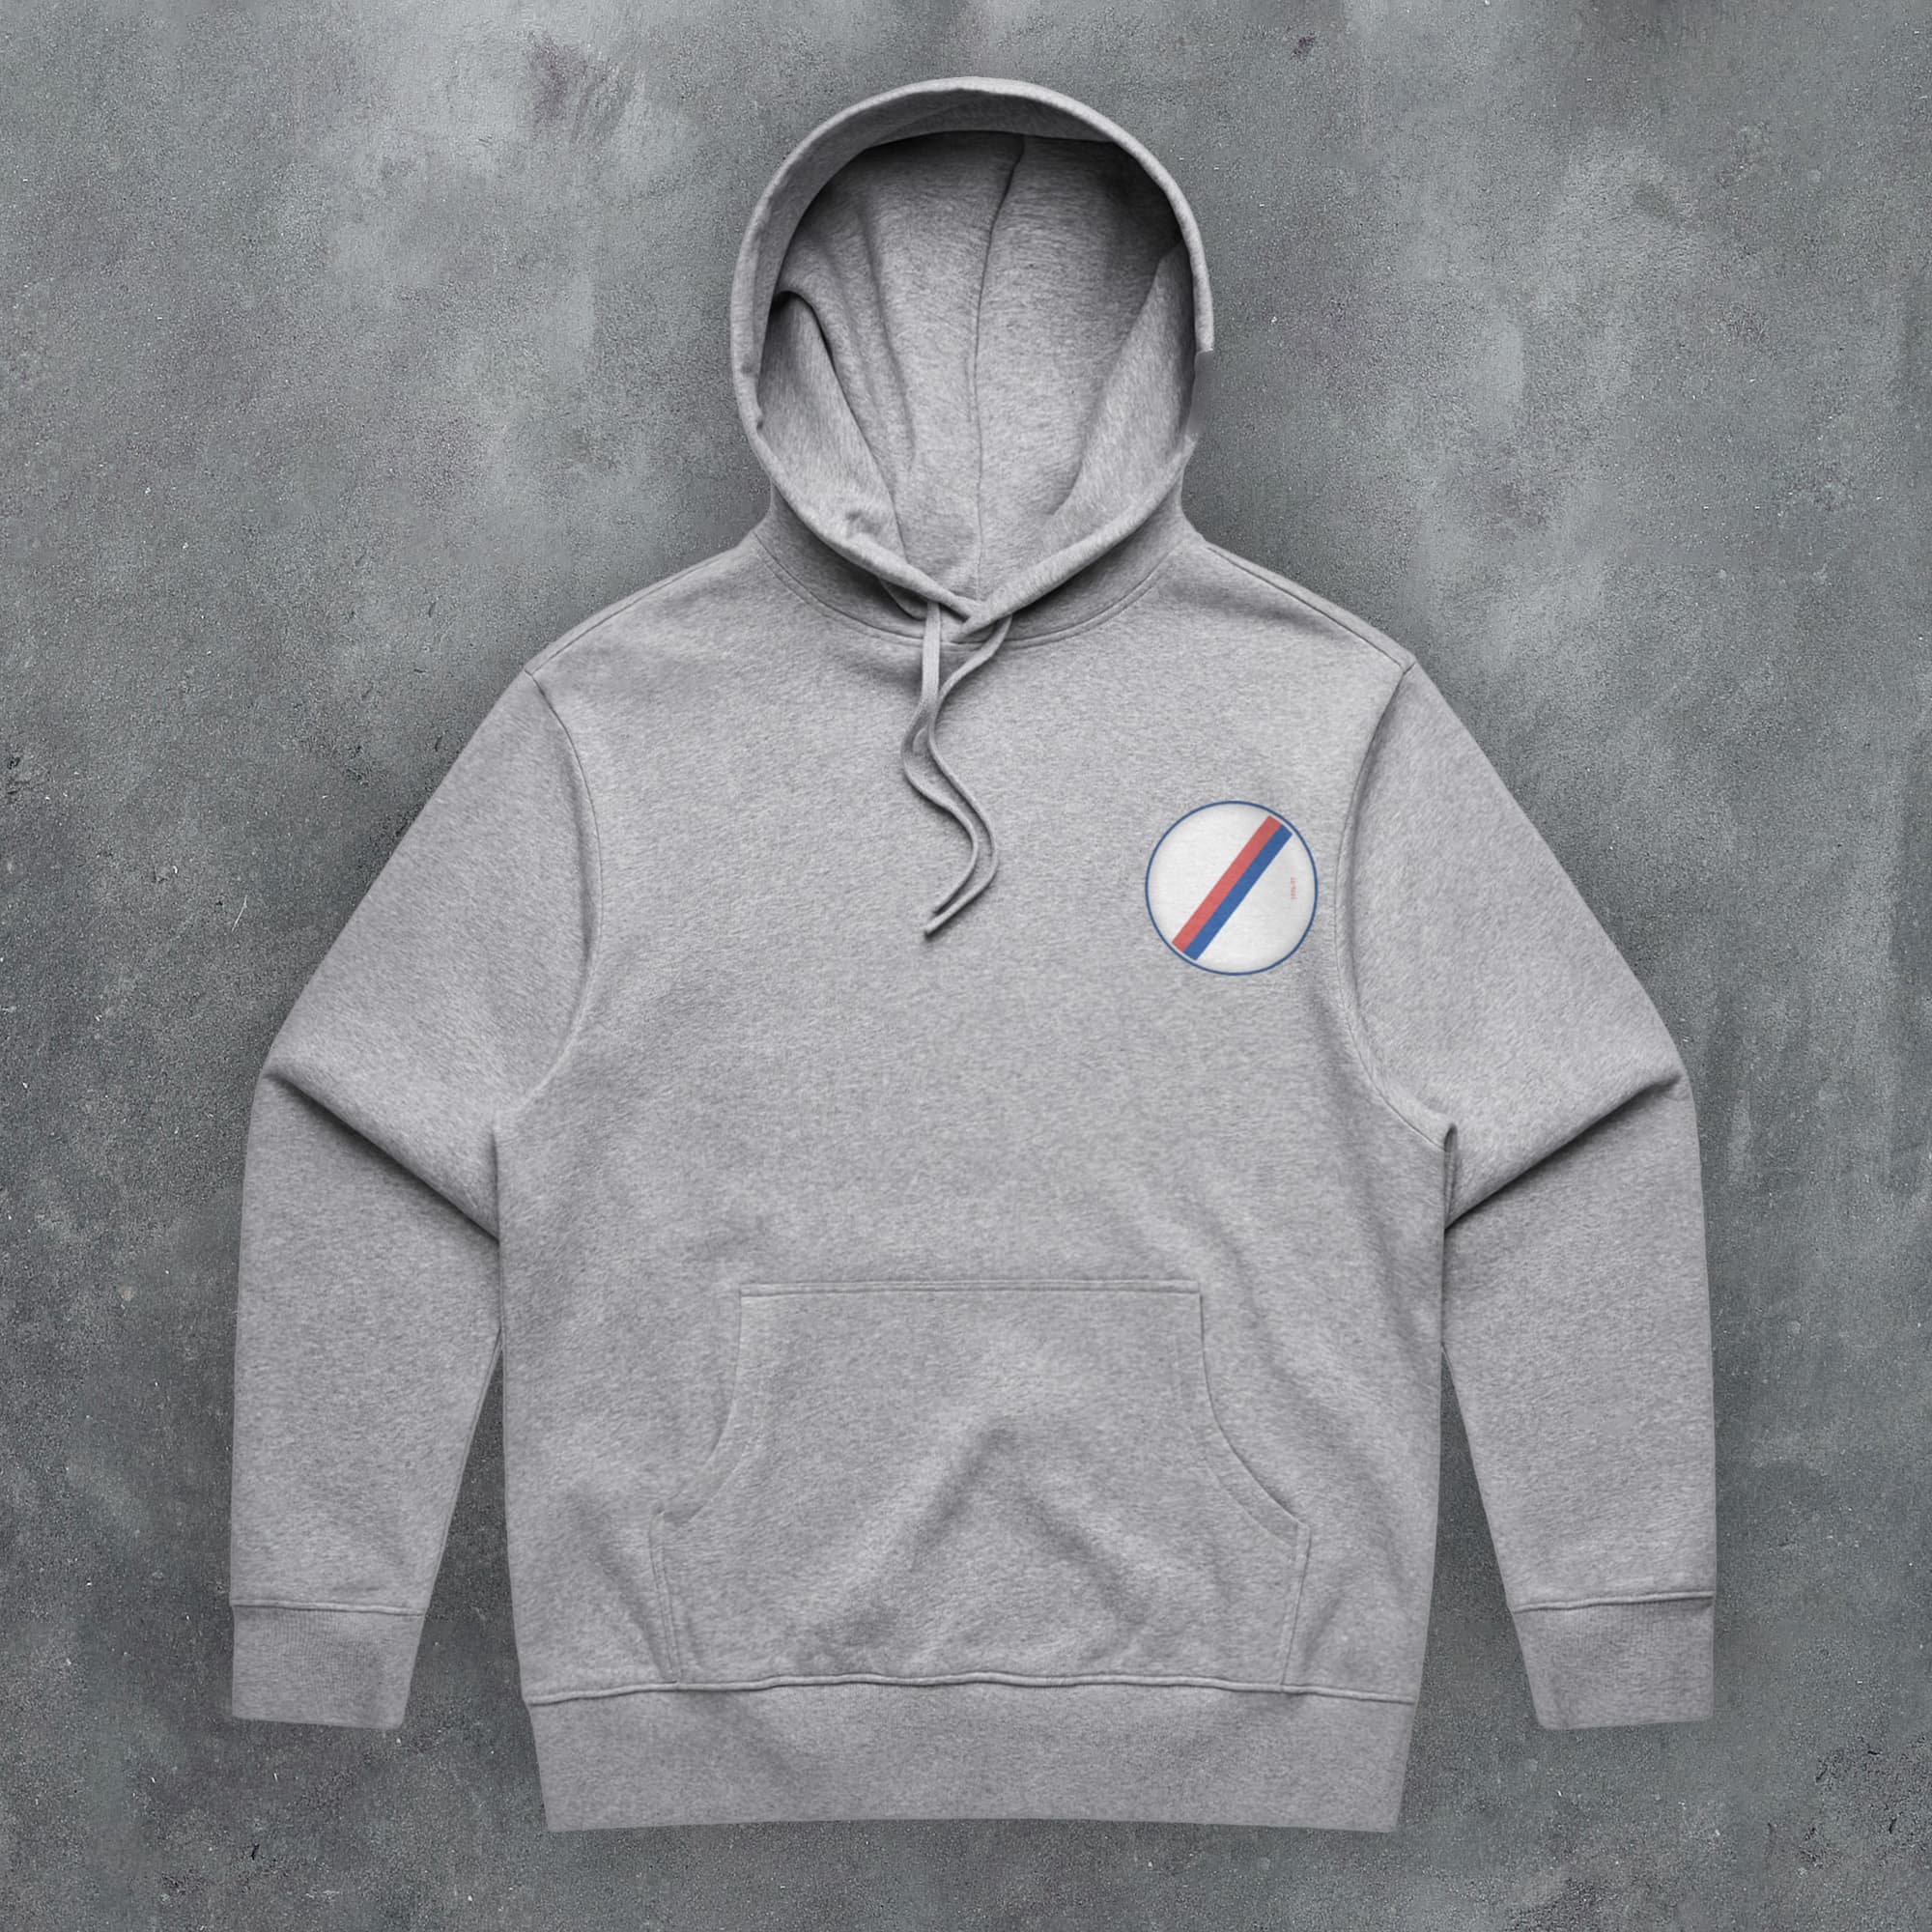 a grey hoodie with a red, white and blue stripe on it